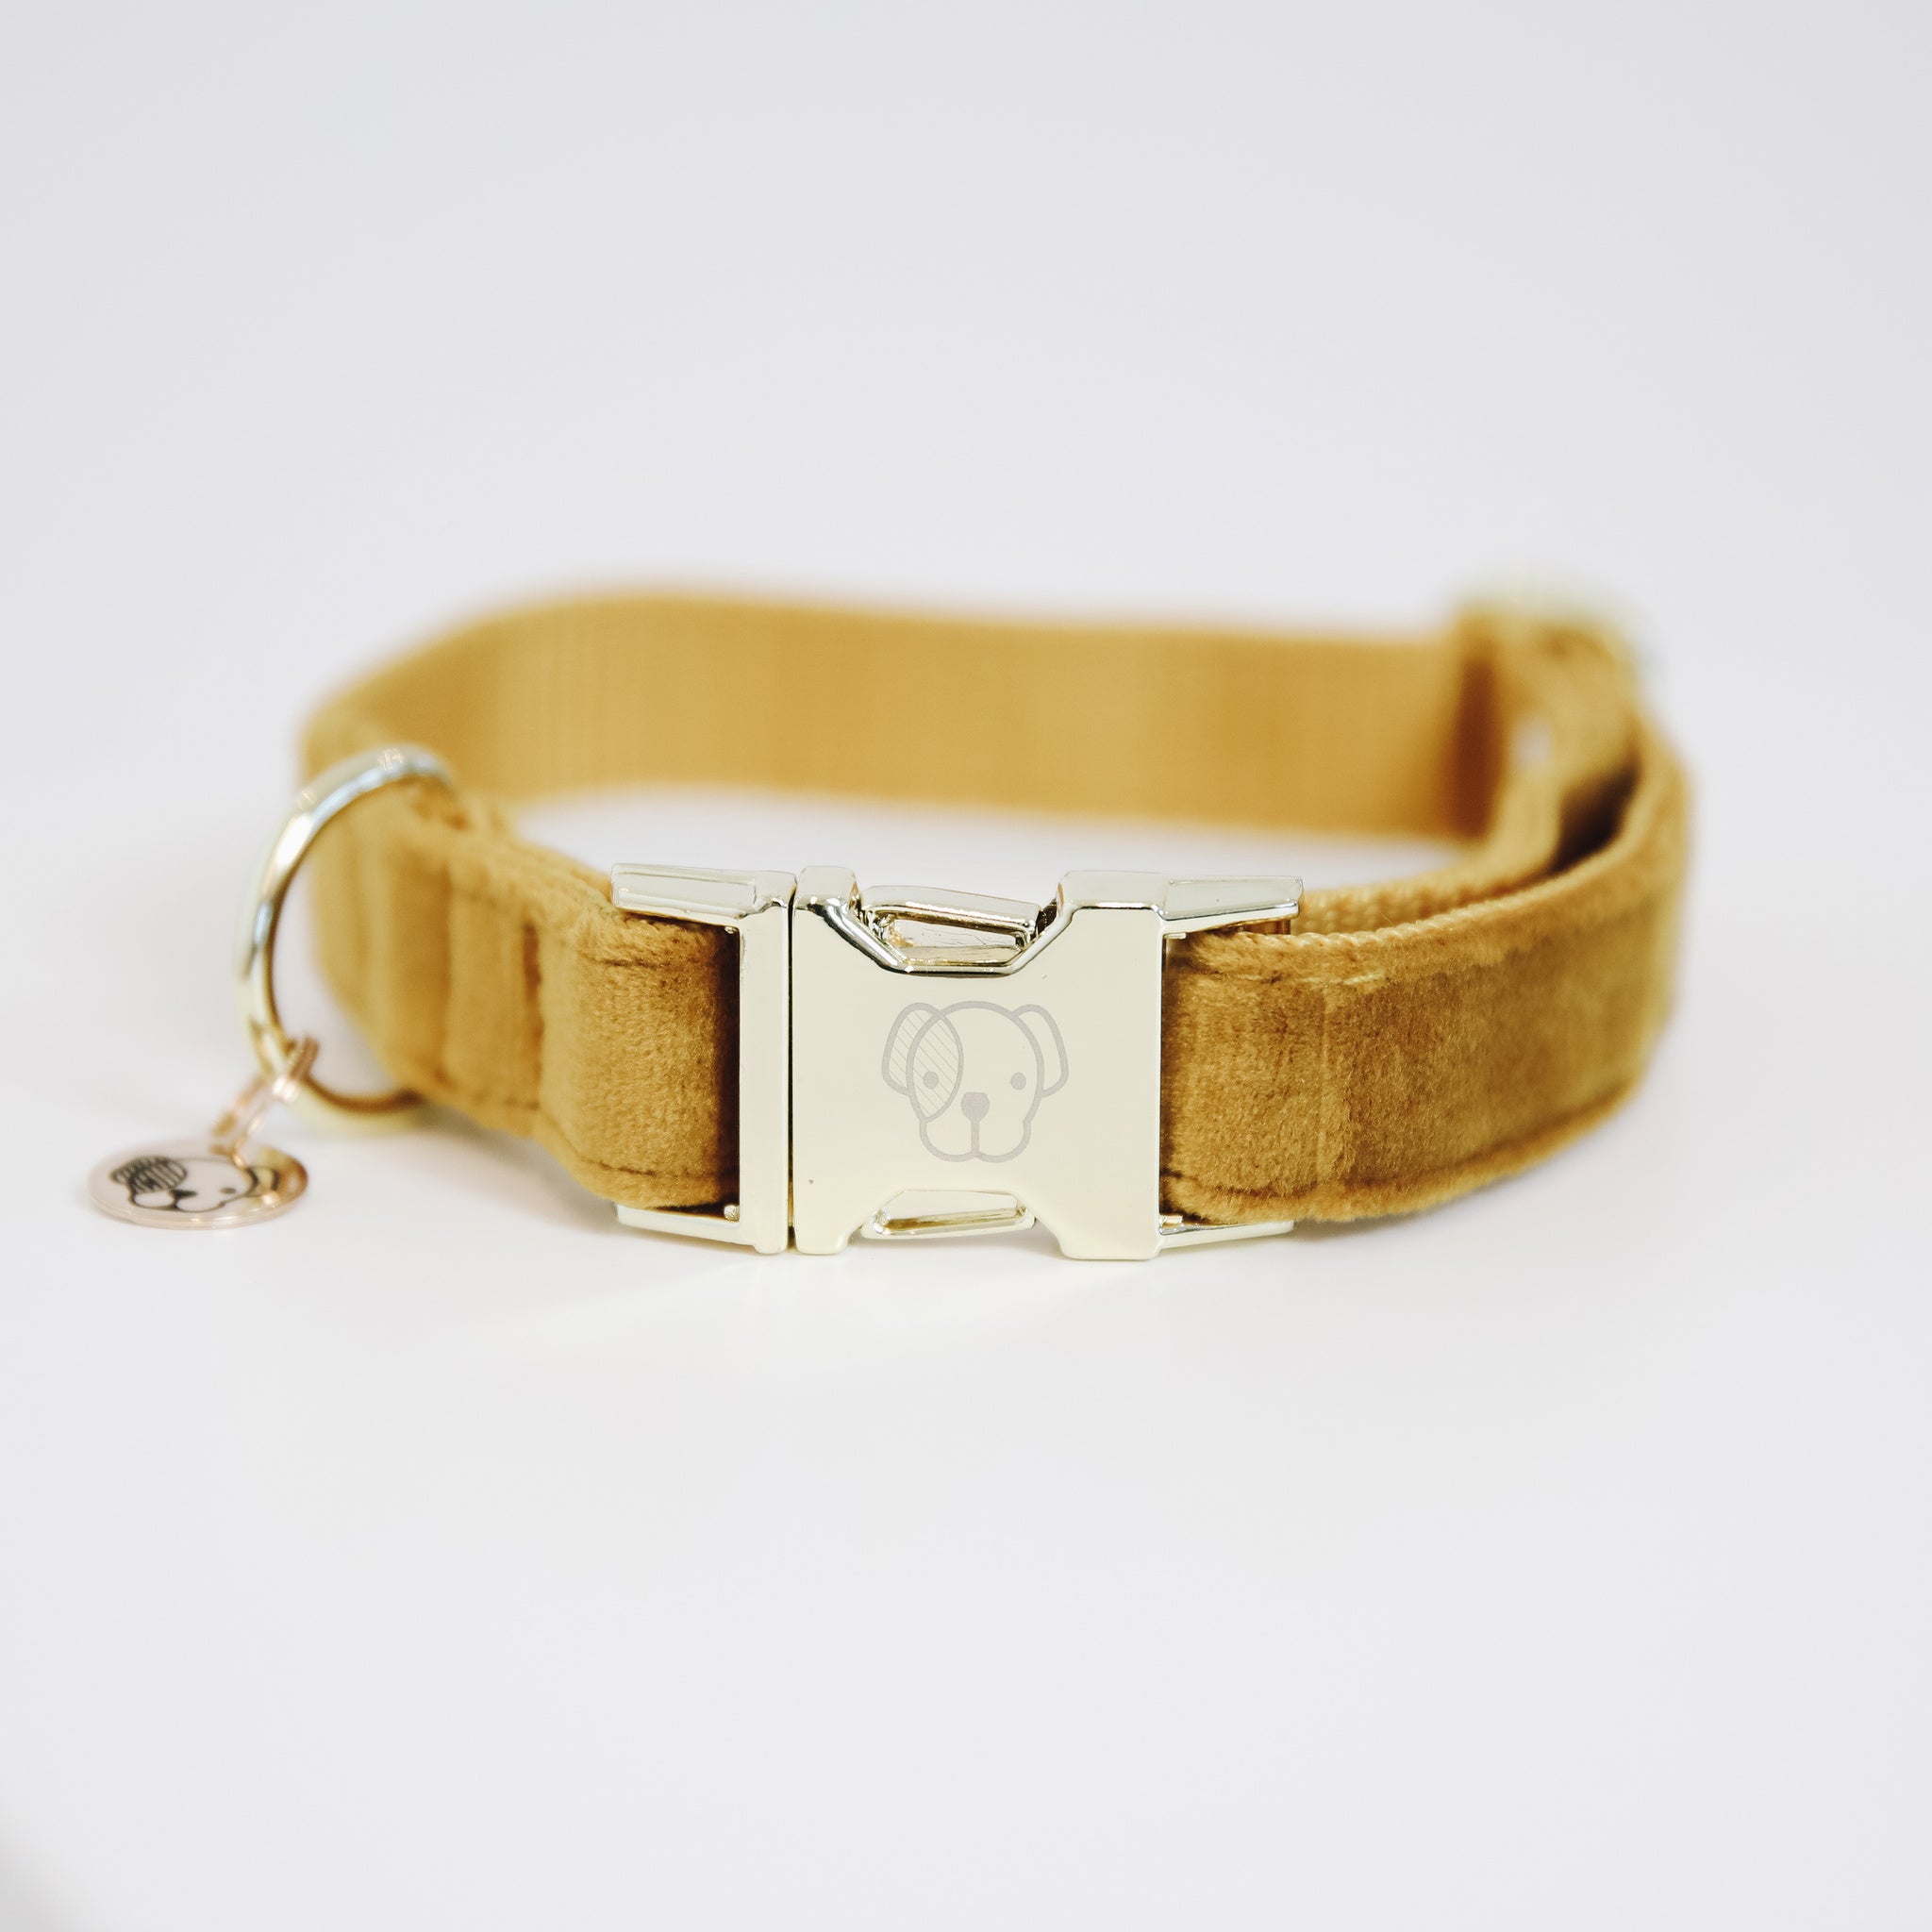 The Kentucky Velvet dog collar is extremely soft yet durable giving a touch of luxury for your dog.  these collars are adjustable so great for a growing dog. The collar has a gold clip backless with the Kentucky dog logo and a gold tag for you to engrave.  matching leads available. 